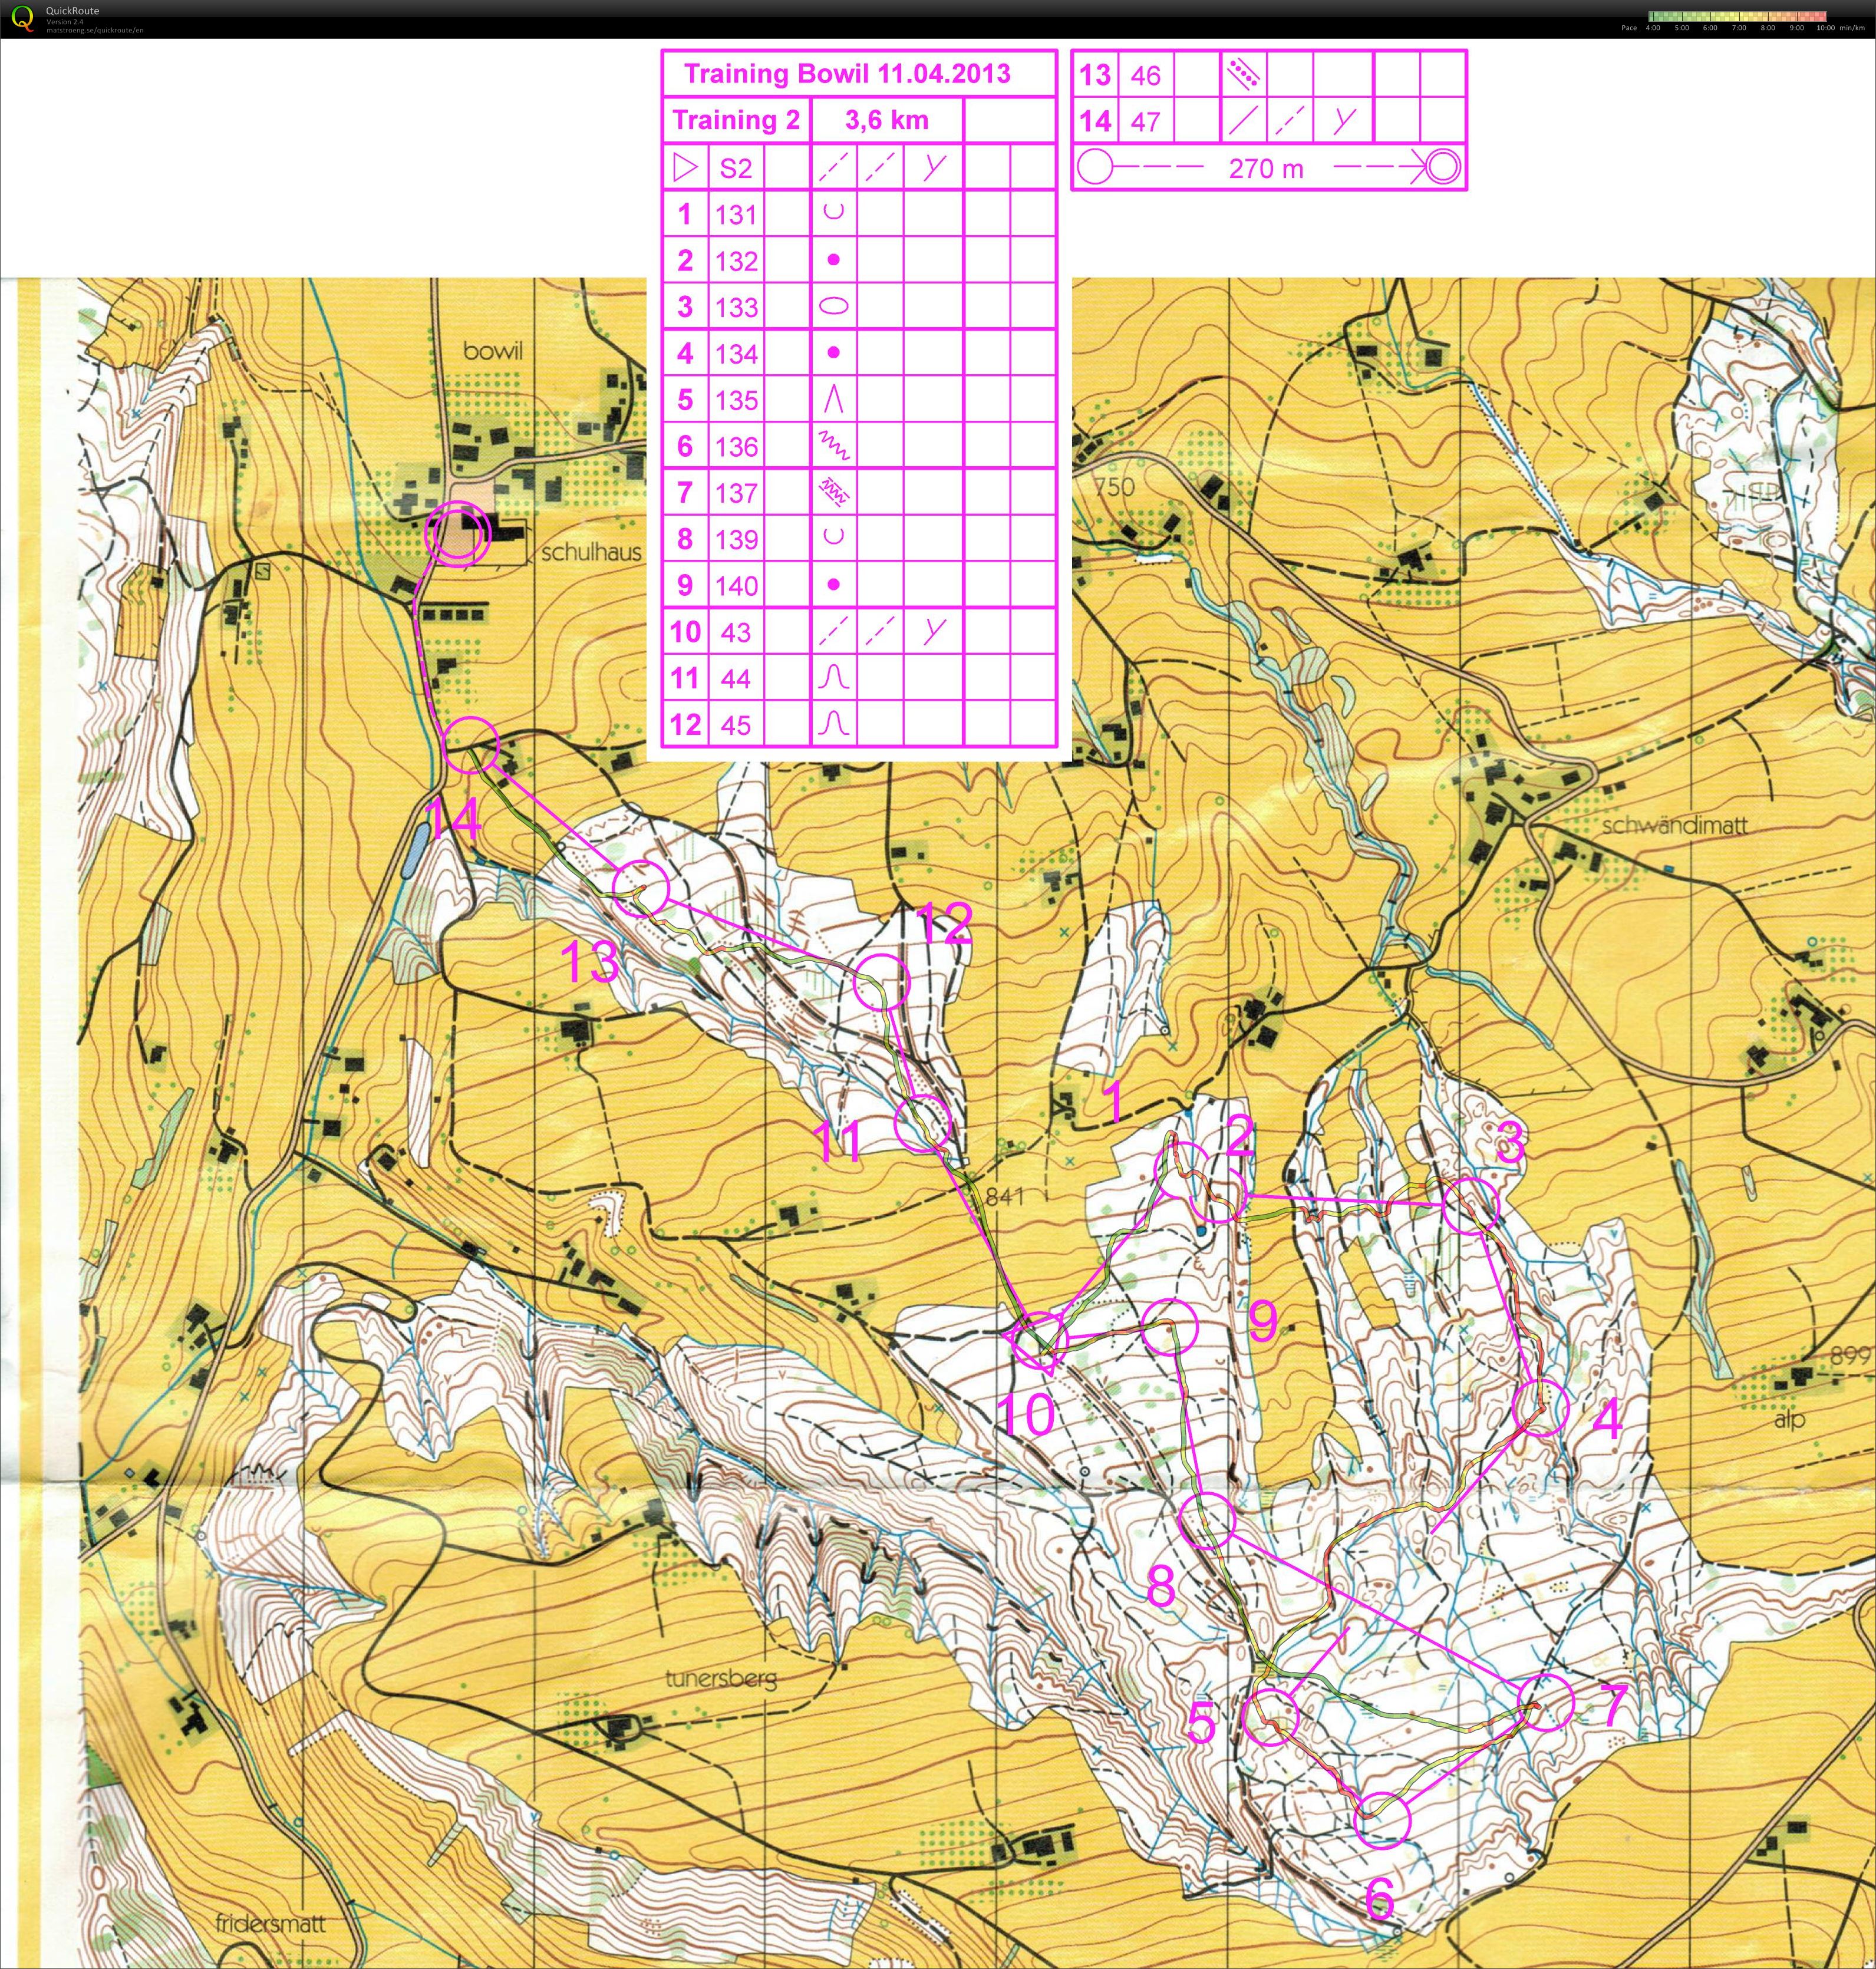 Training Bowil Map 2 (11.04.2013)